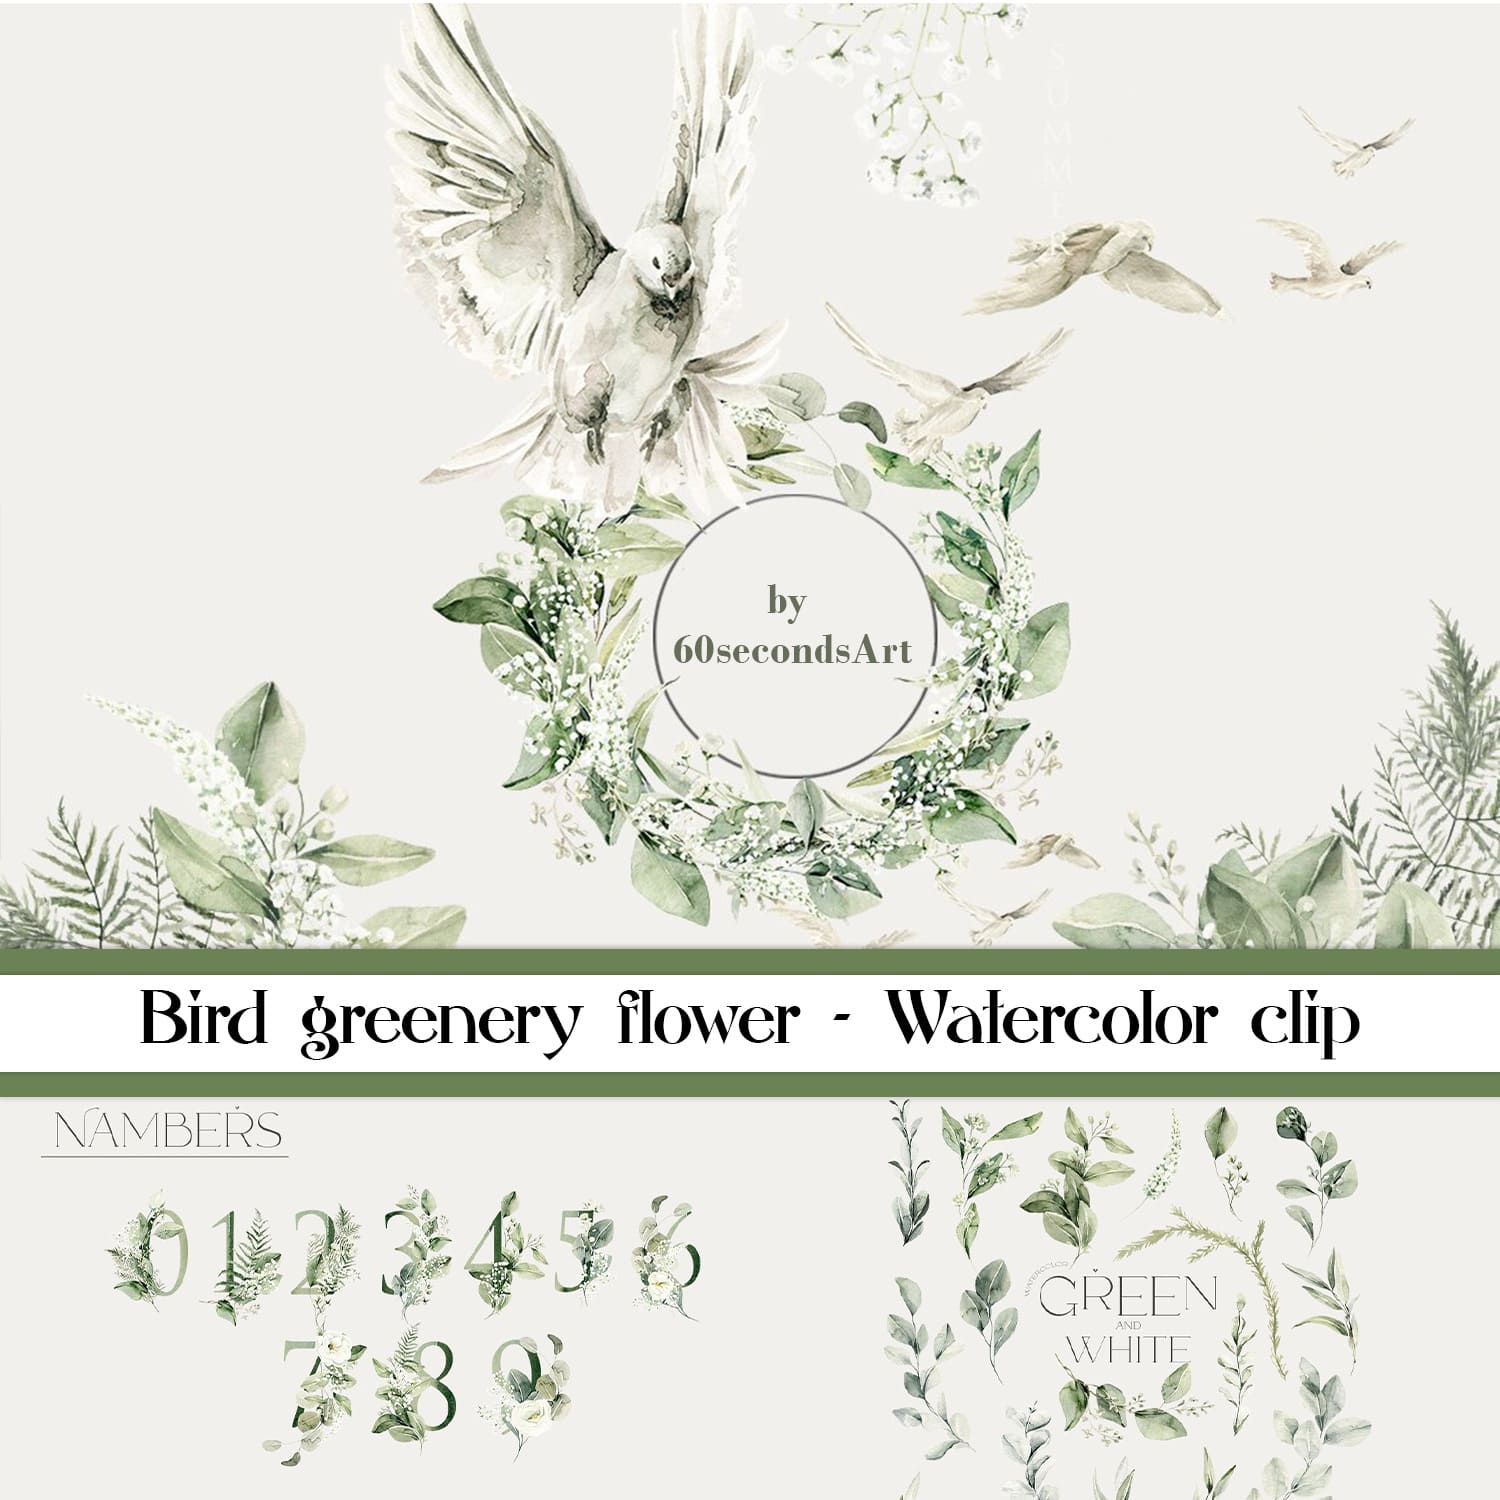 Bird Greenery Flower Watercolor Clip cover image.